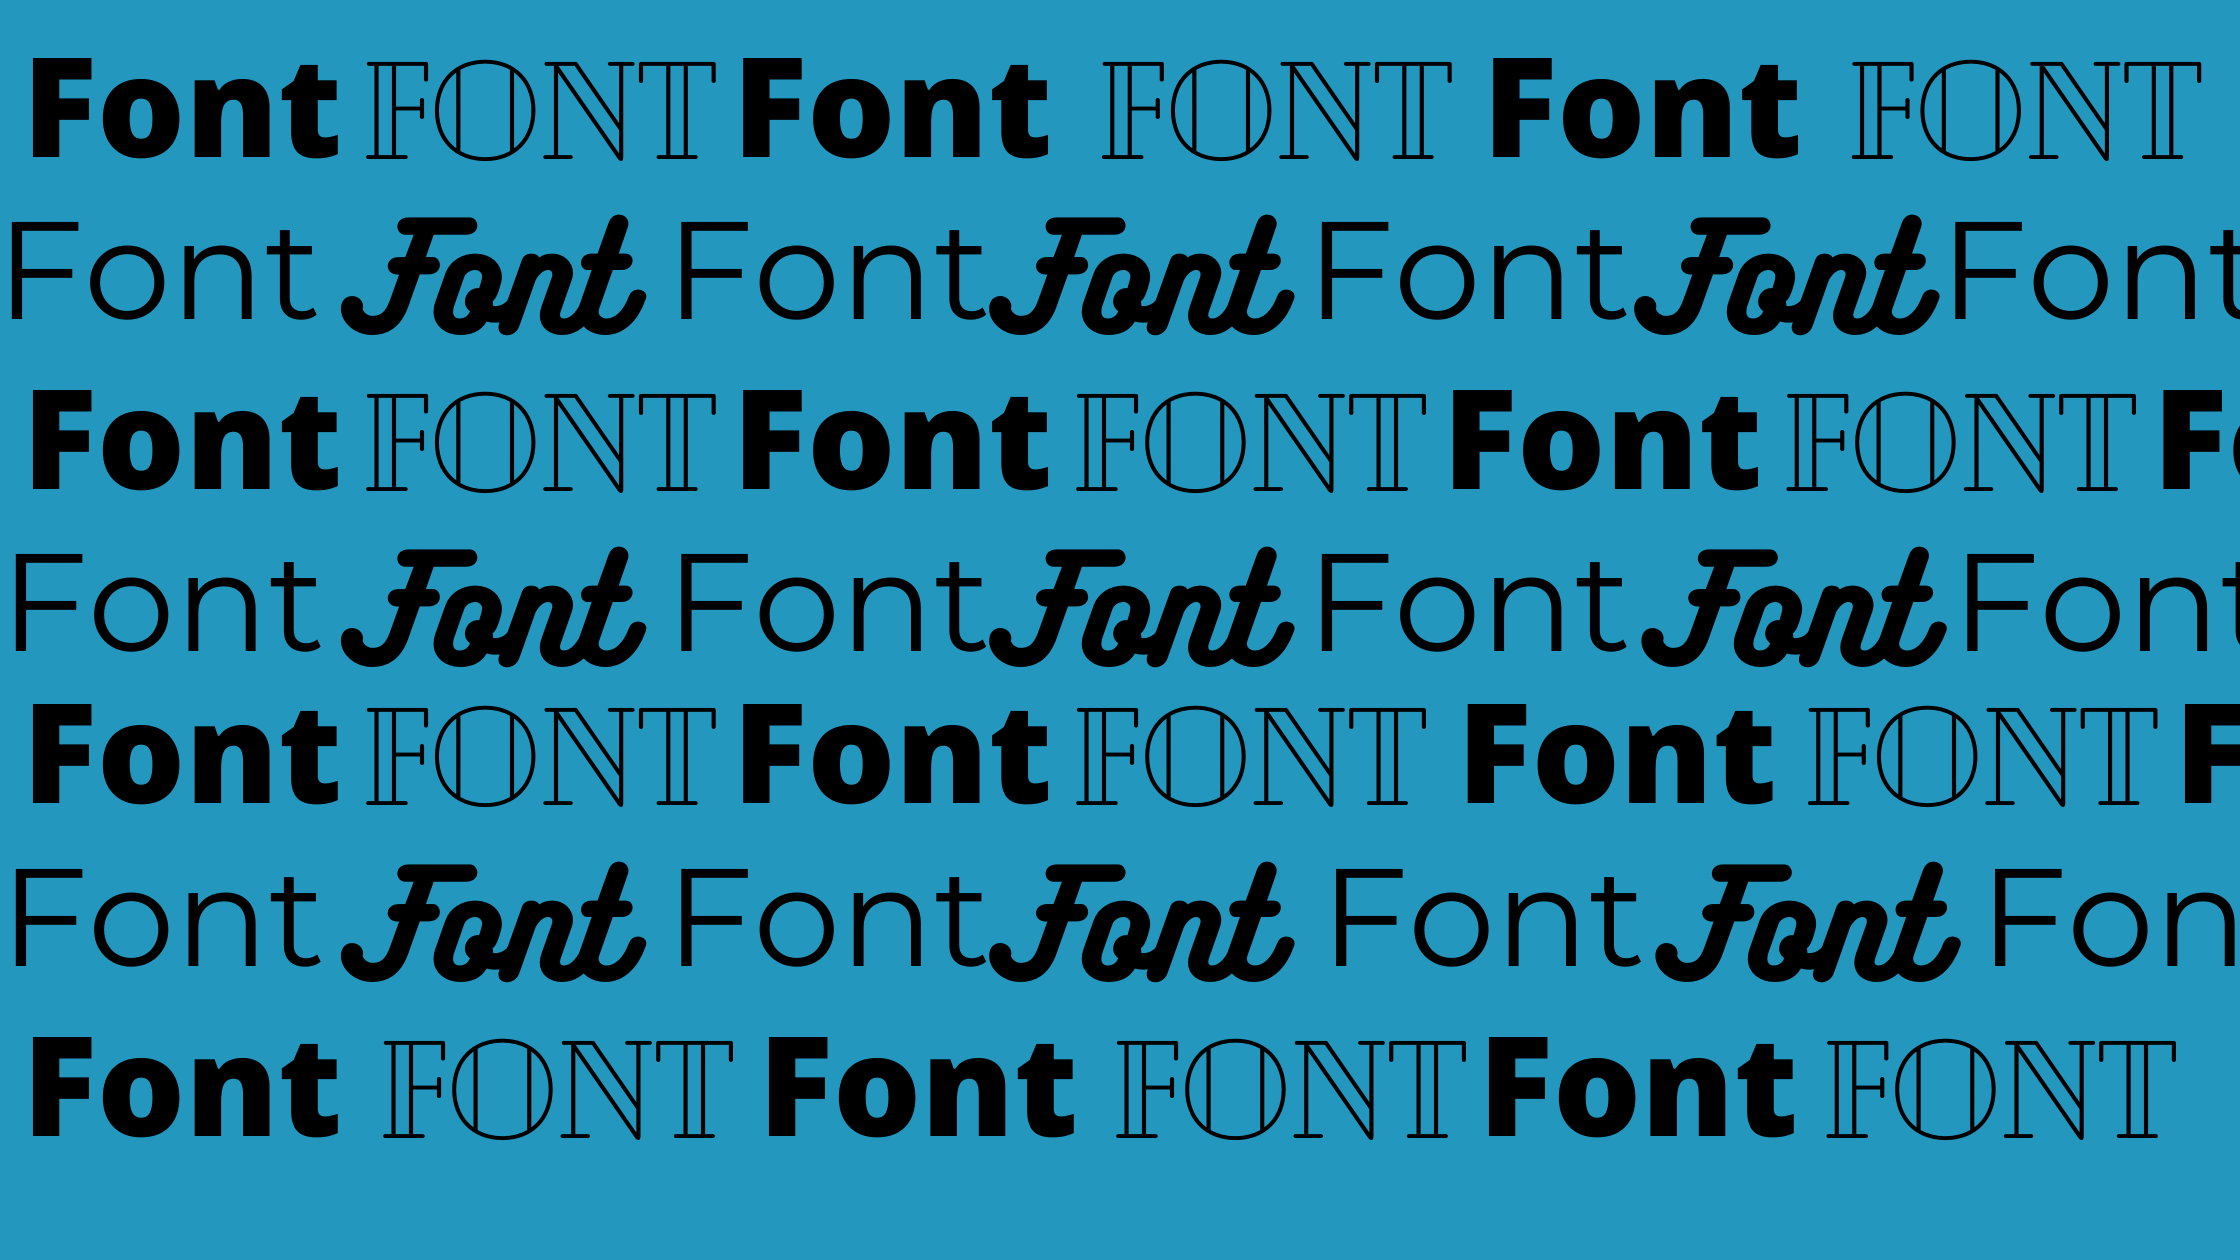 The word "Font" in different fonts